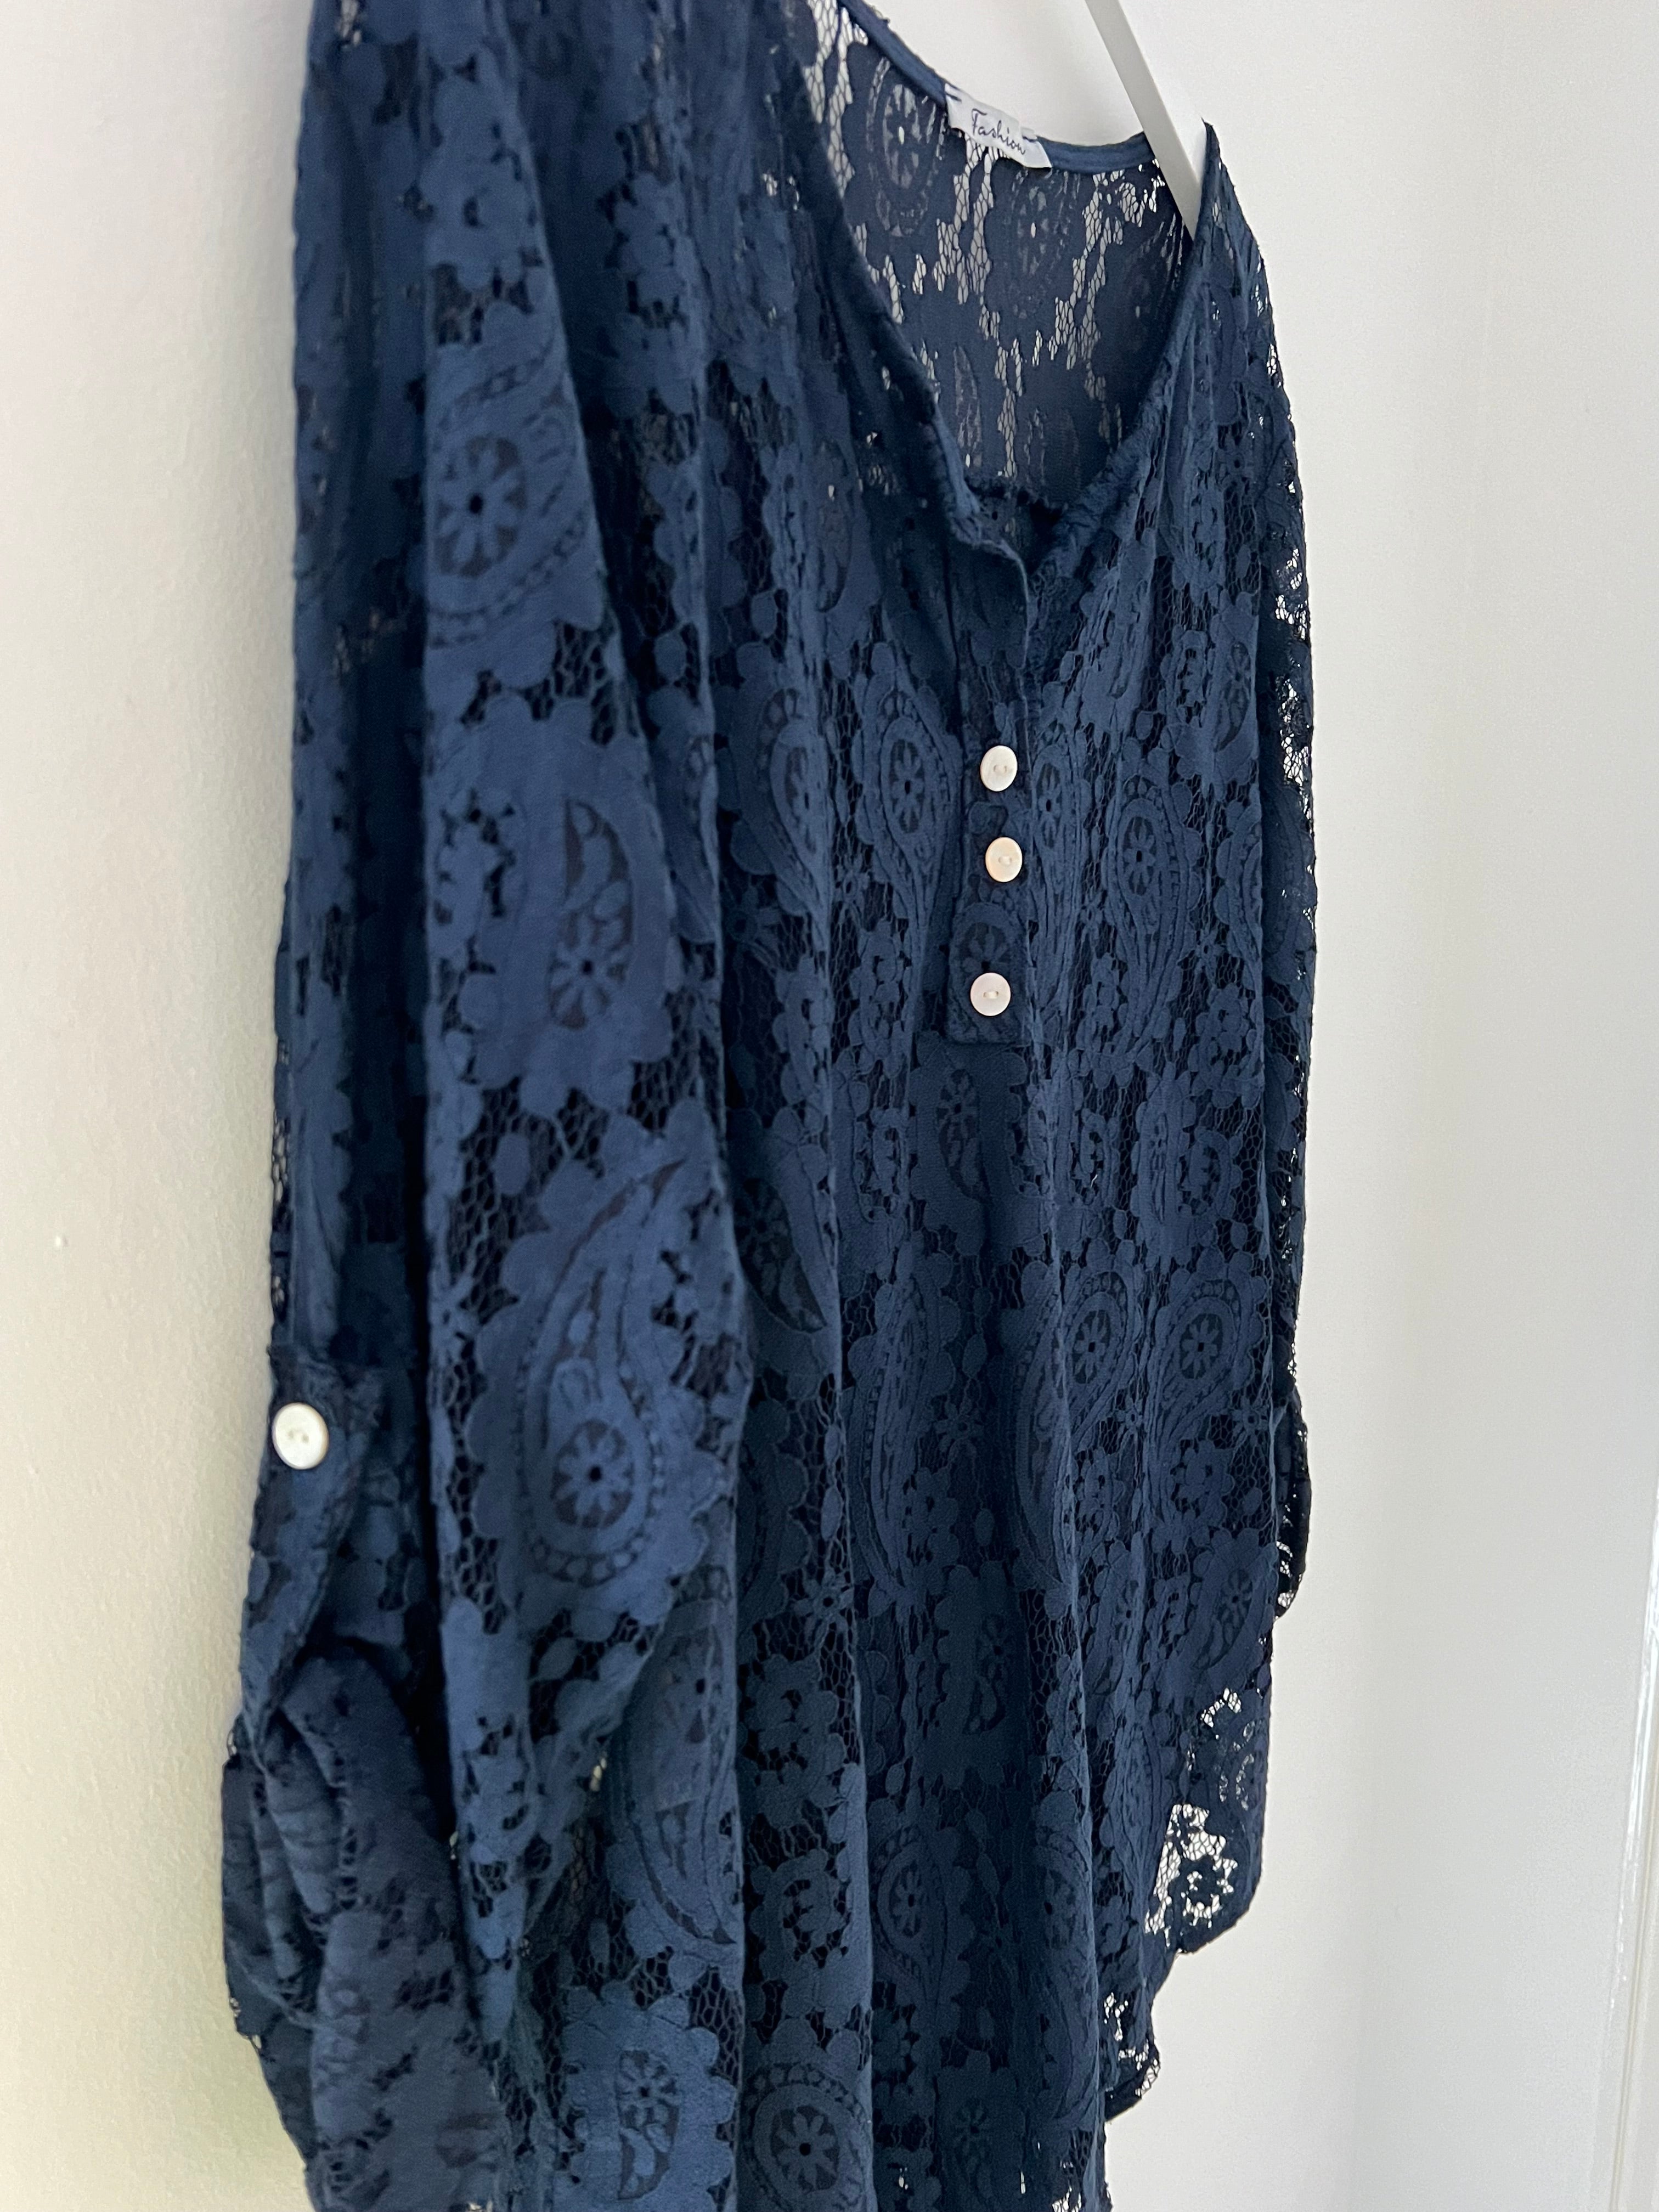 Lace Blouse & Cami in Navy